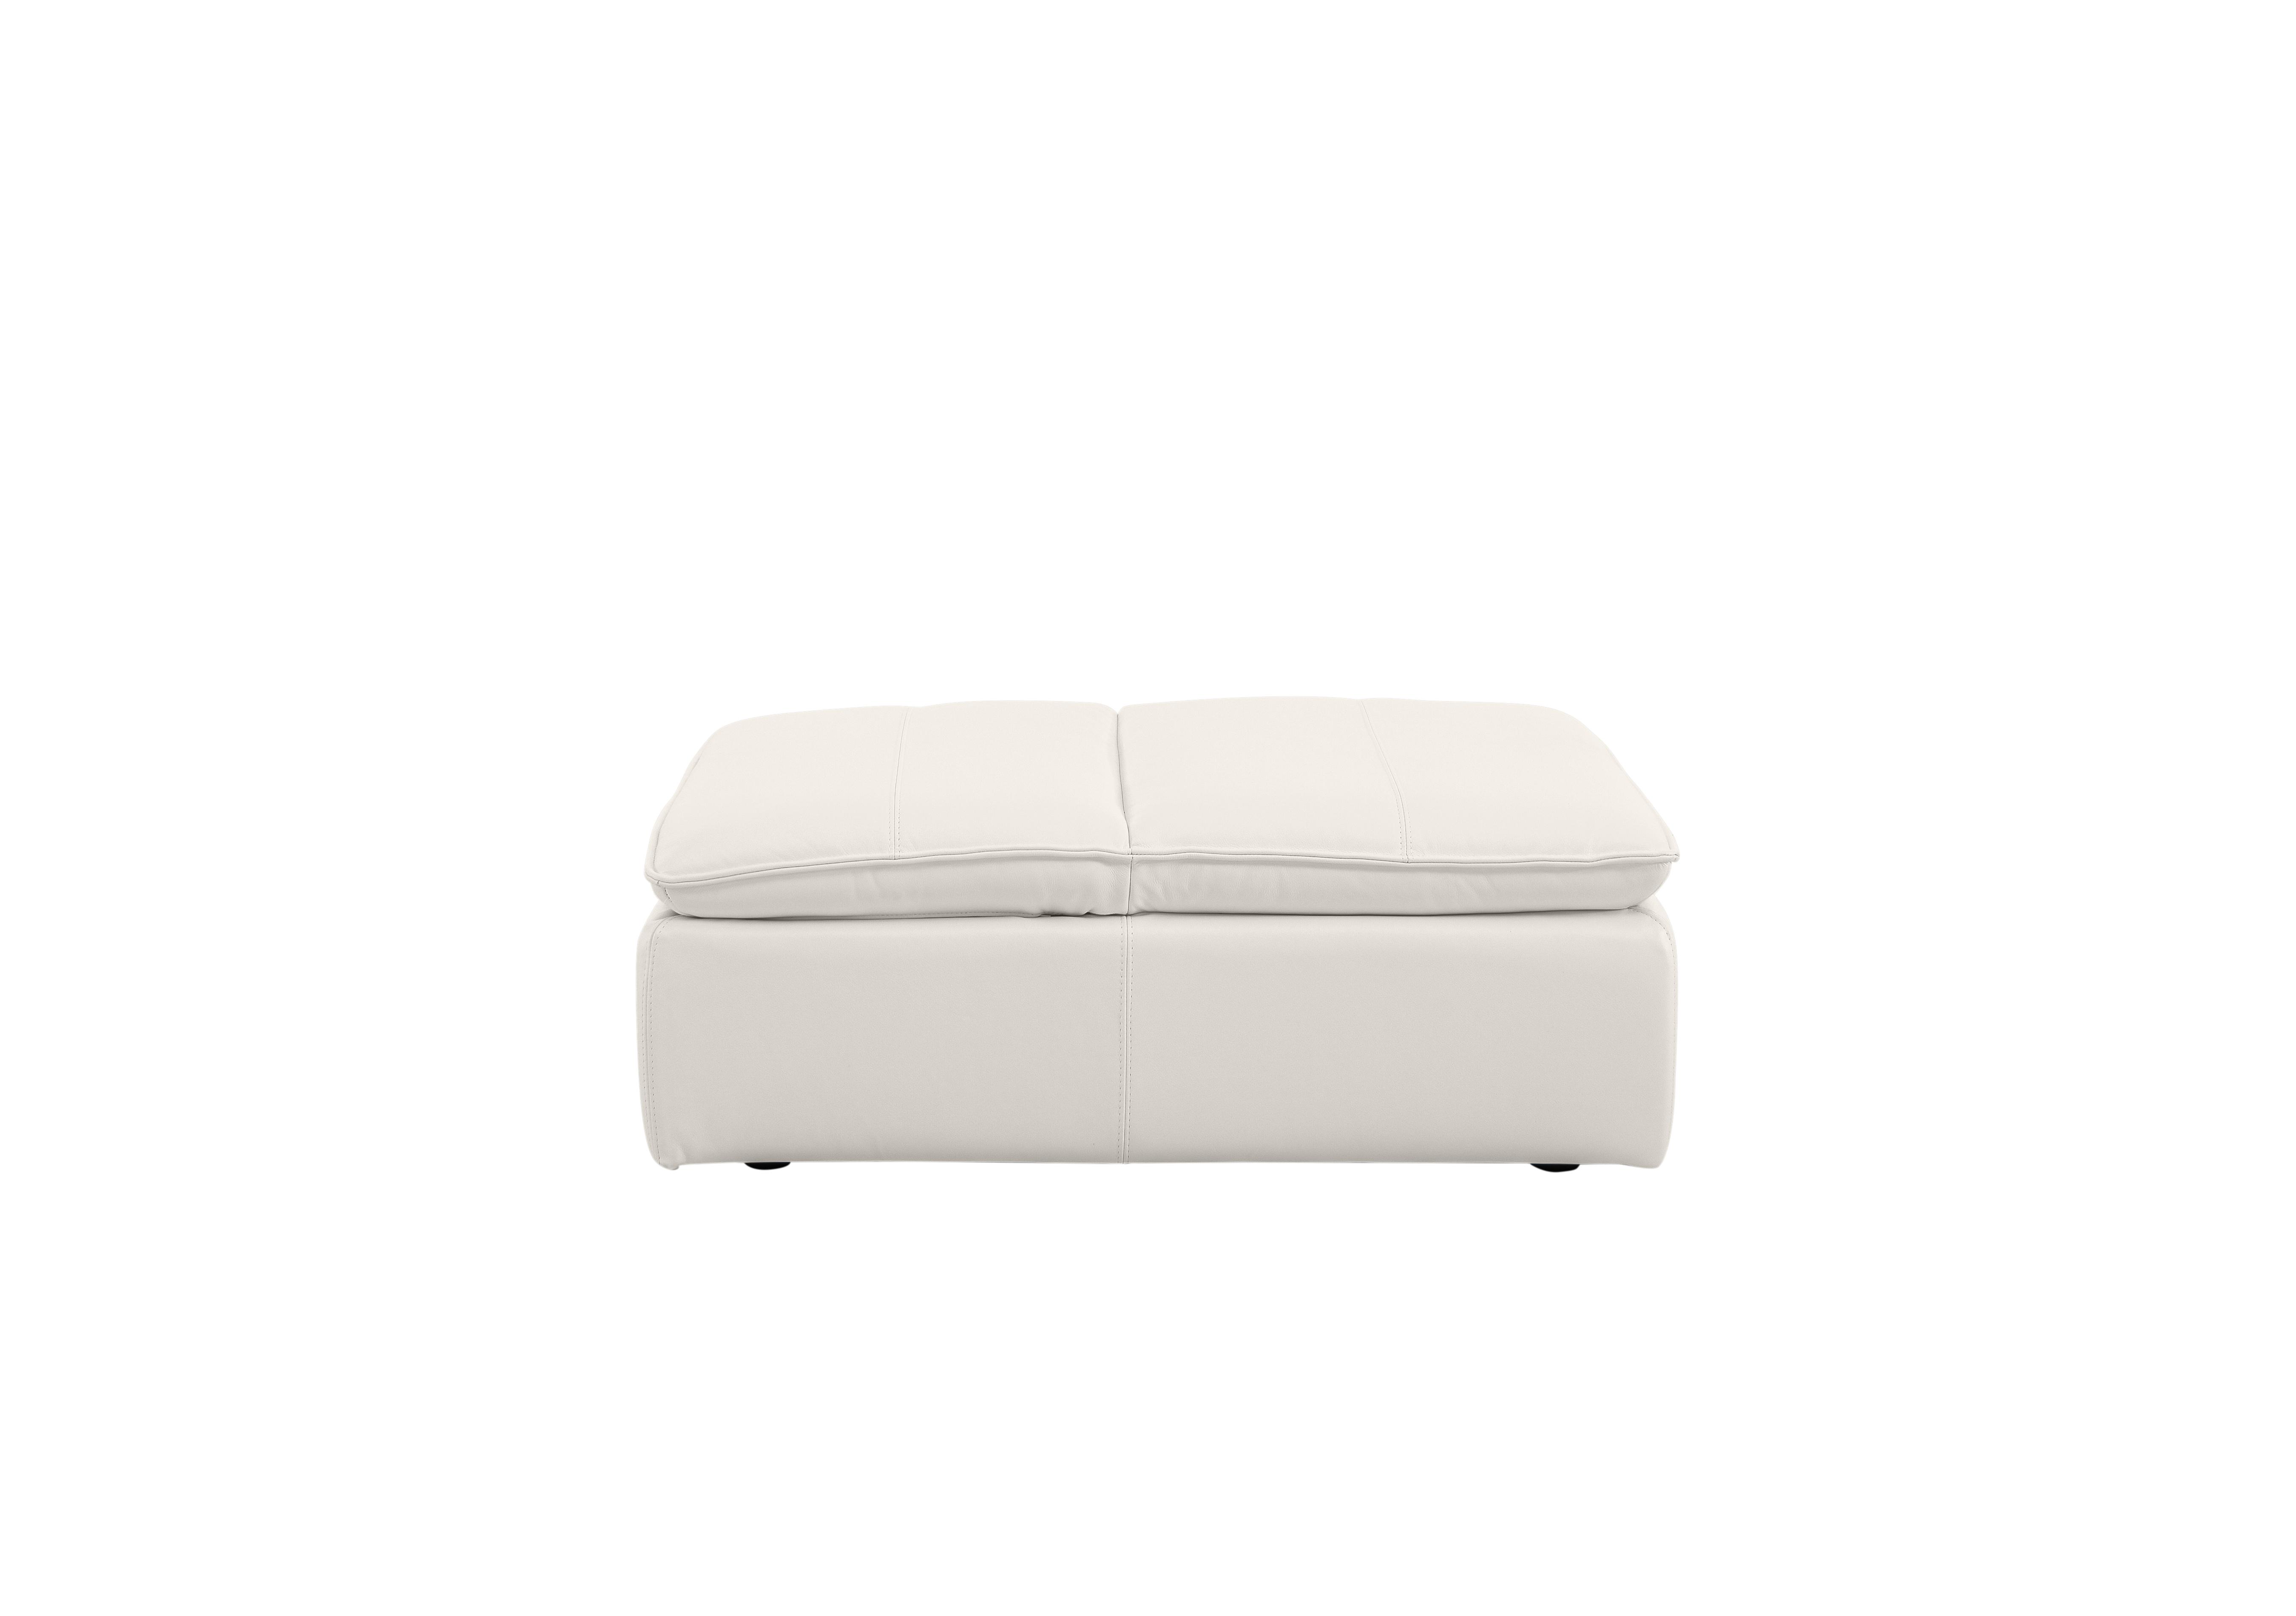 Starlight Express Leather Storage Chair Footstool in Bv-744d Star White on Furniture Village